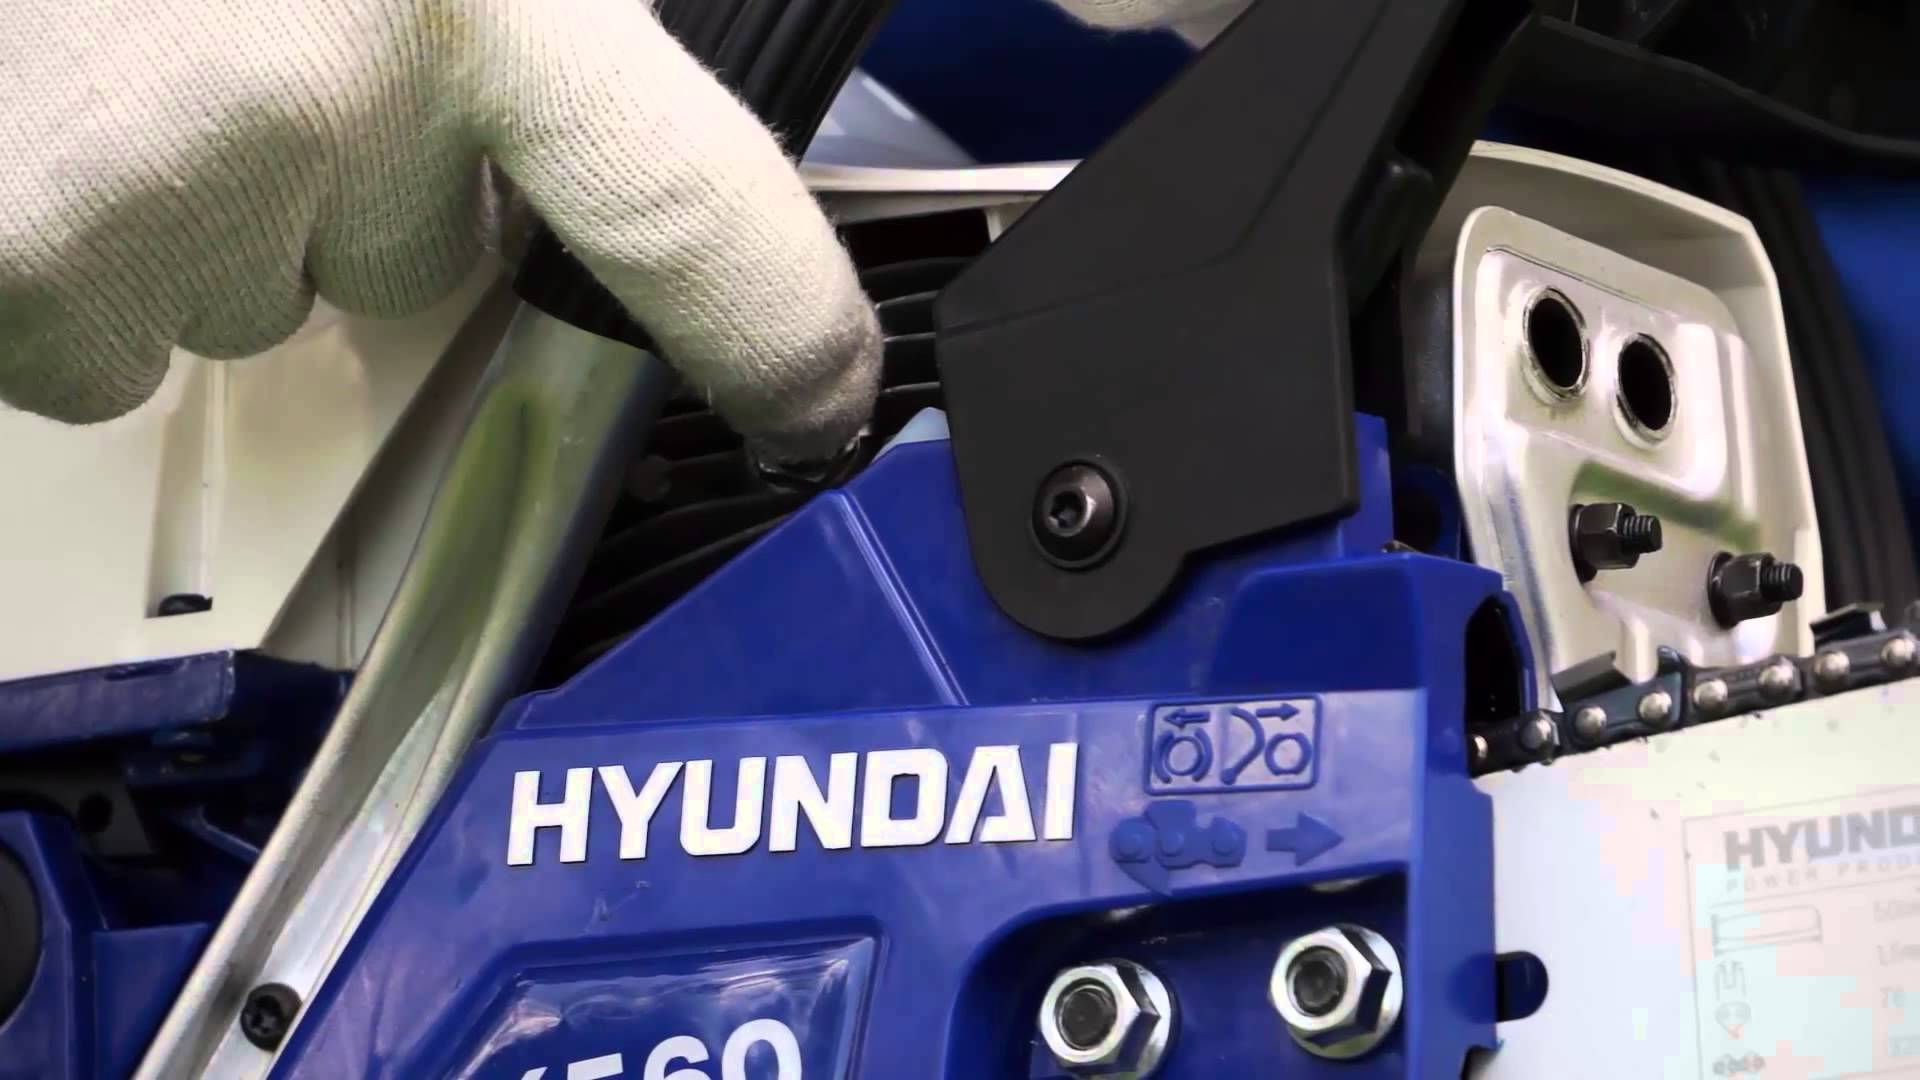 Hyundai chainsaw test and experiences: A comprehensive overview of the model series of Hyundai chainsaws